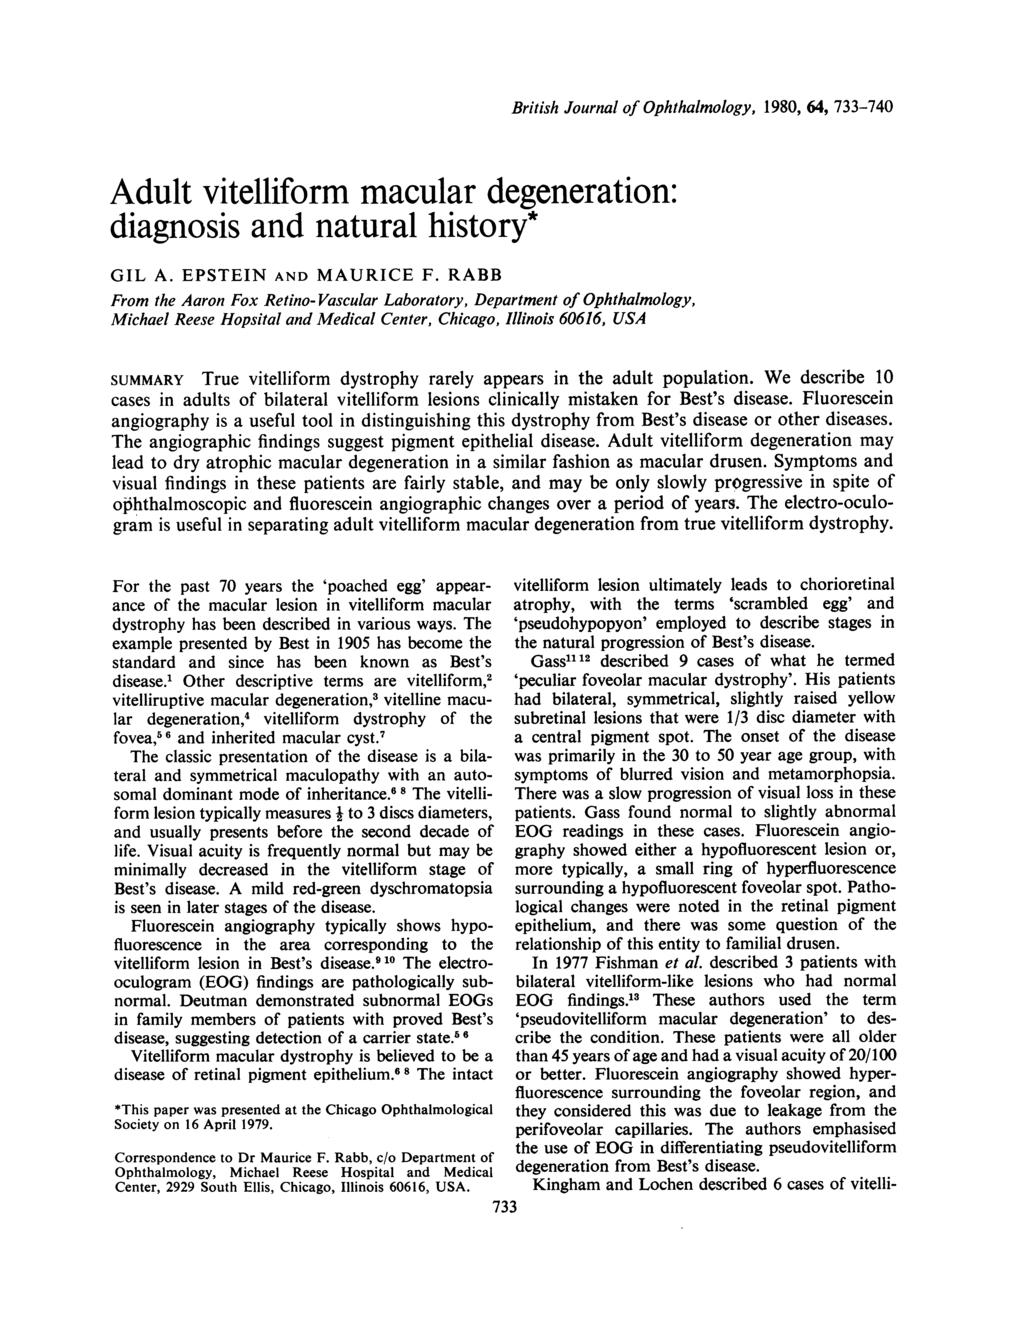 Adult vitelliform macular degeneration: diagnosis and natural history* GIL A. EPSTEIN AND MAURICE F.